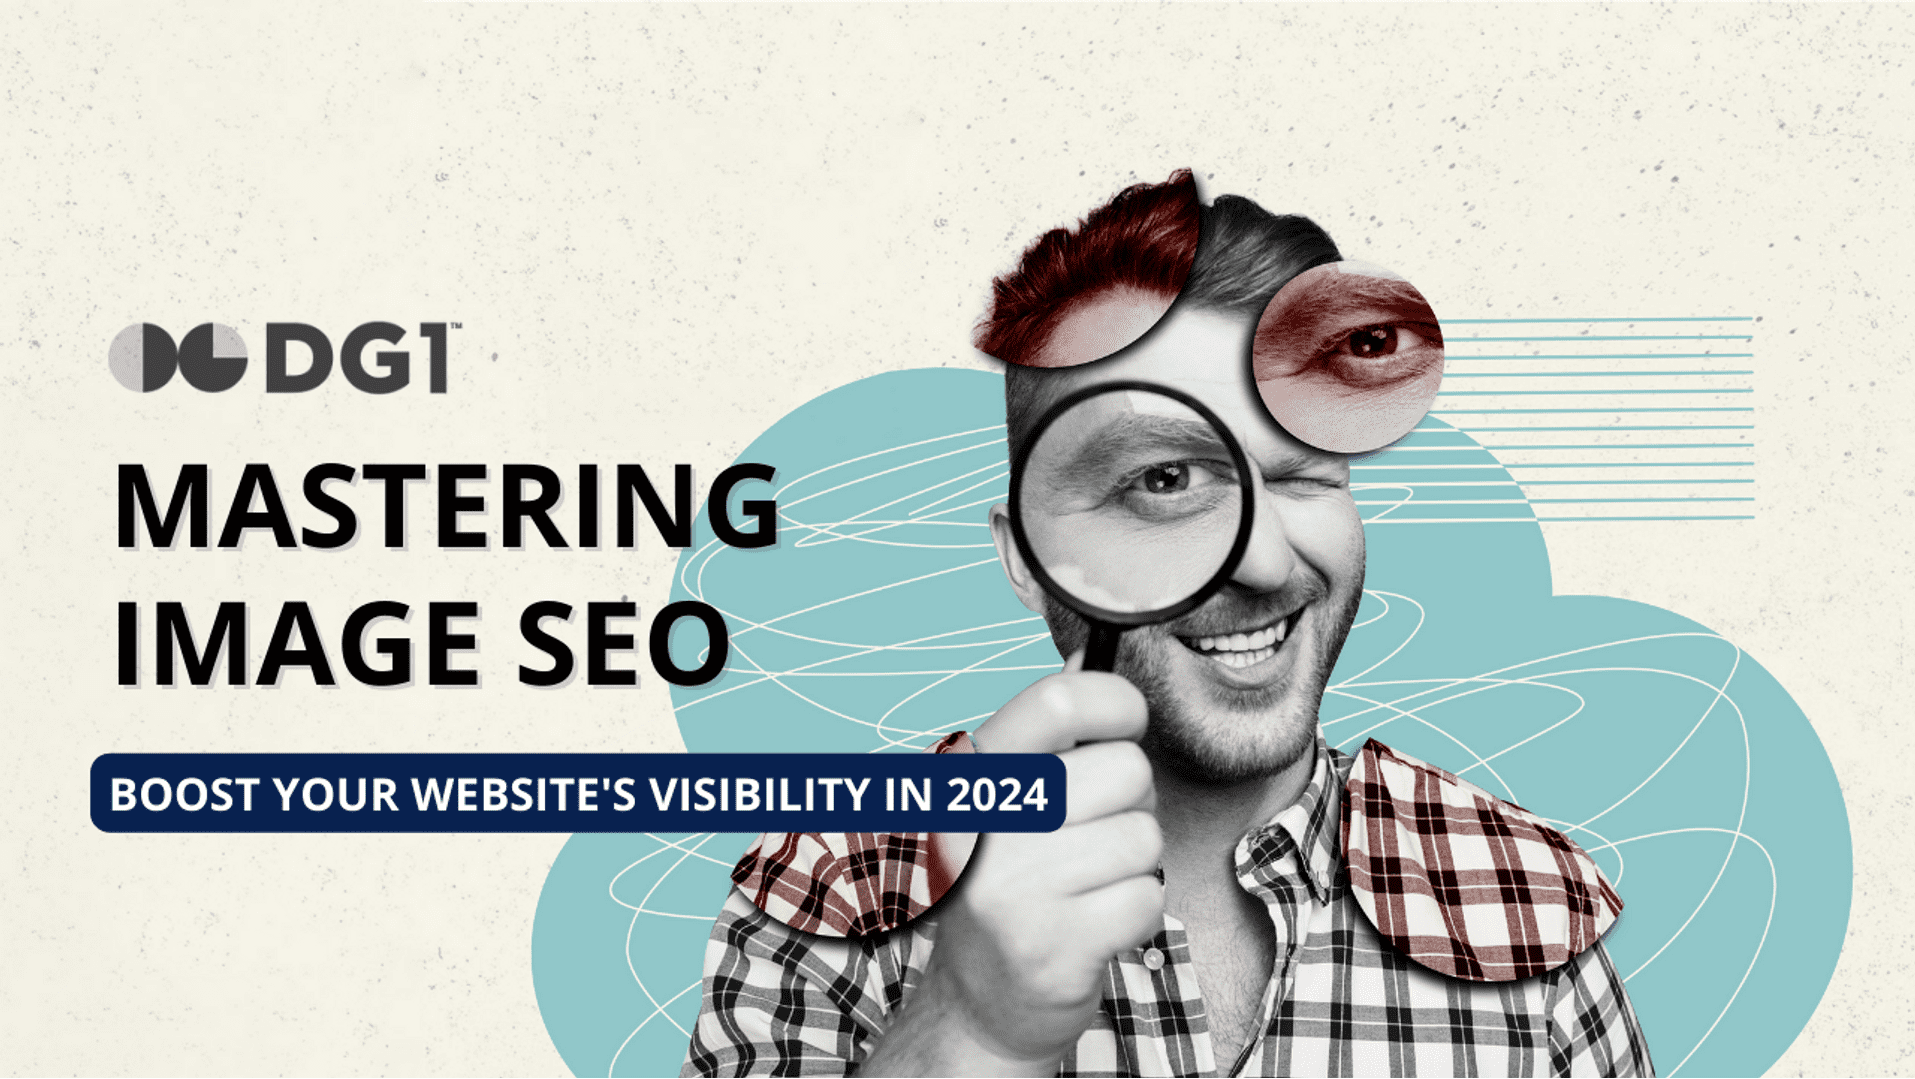 Mastering Image SEO: Boost Your Website's Visibility in 2024